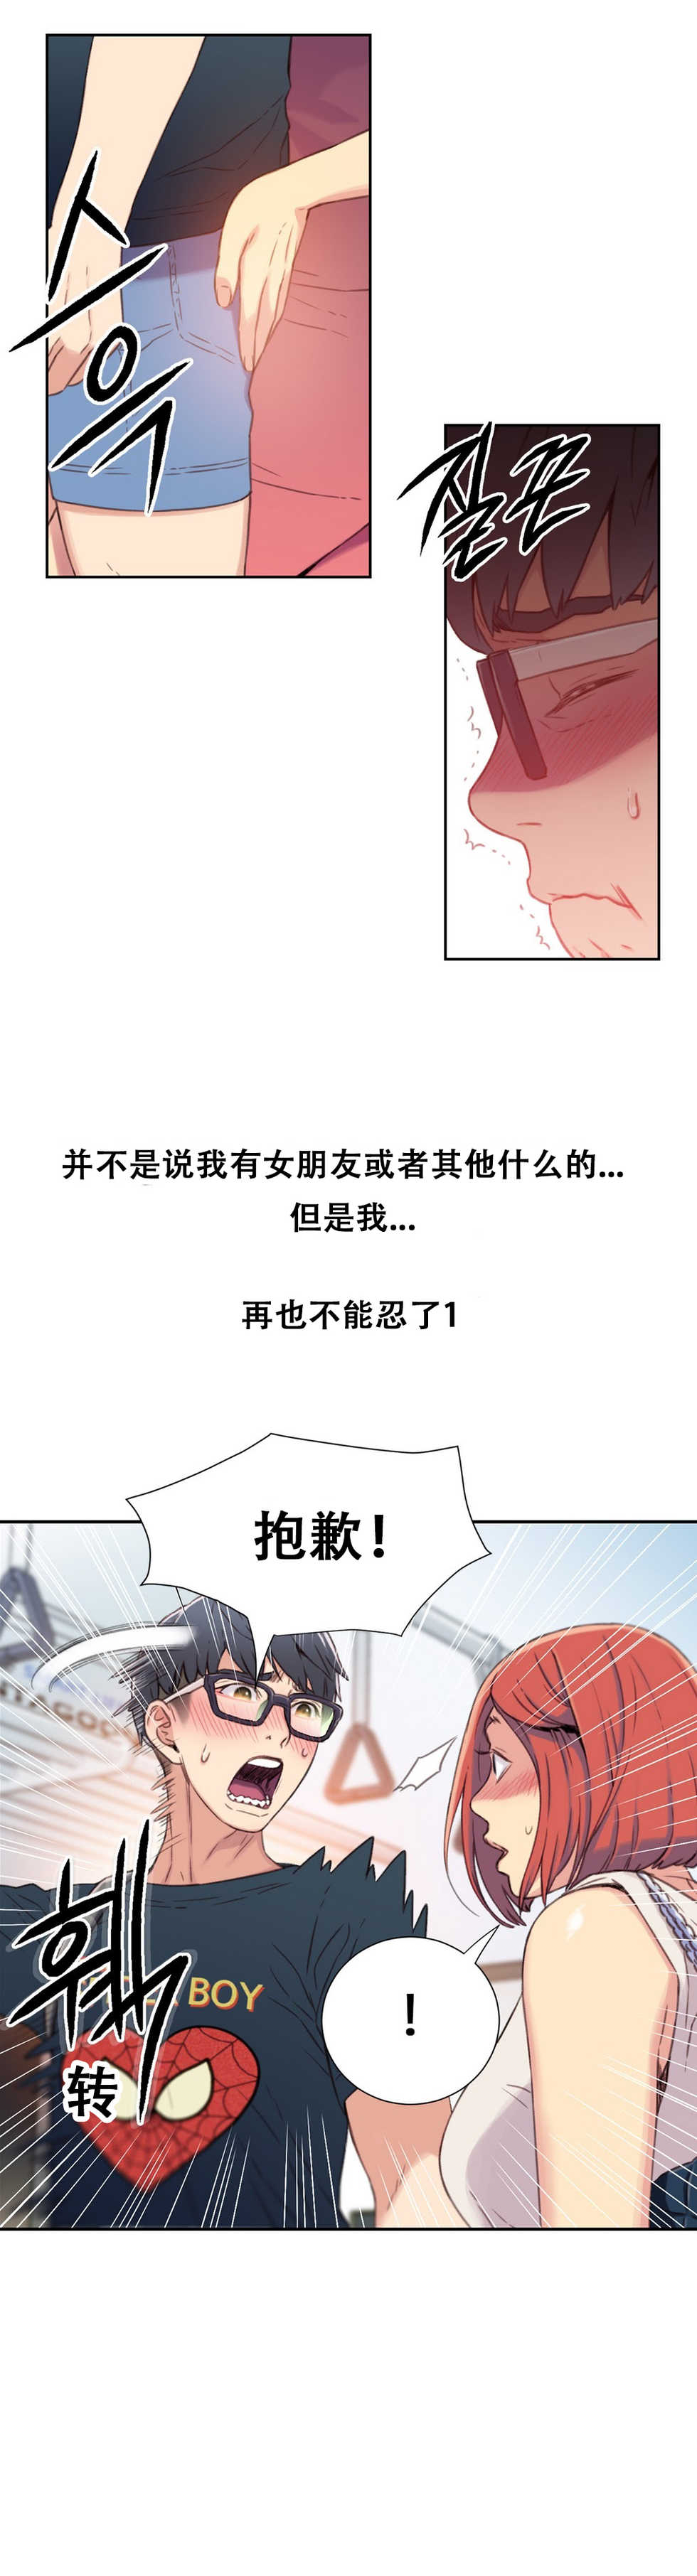 [BAK Hyeong Jun]Sweet Guy Ch.4-6(Chinese)(FITHRPG6) - Page 10